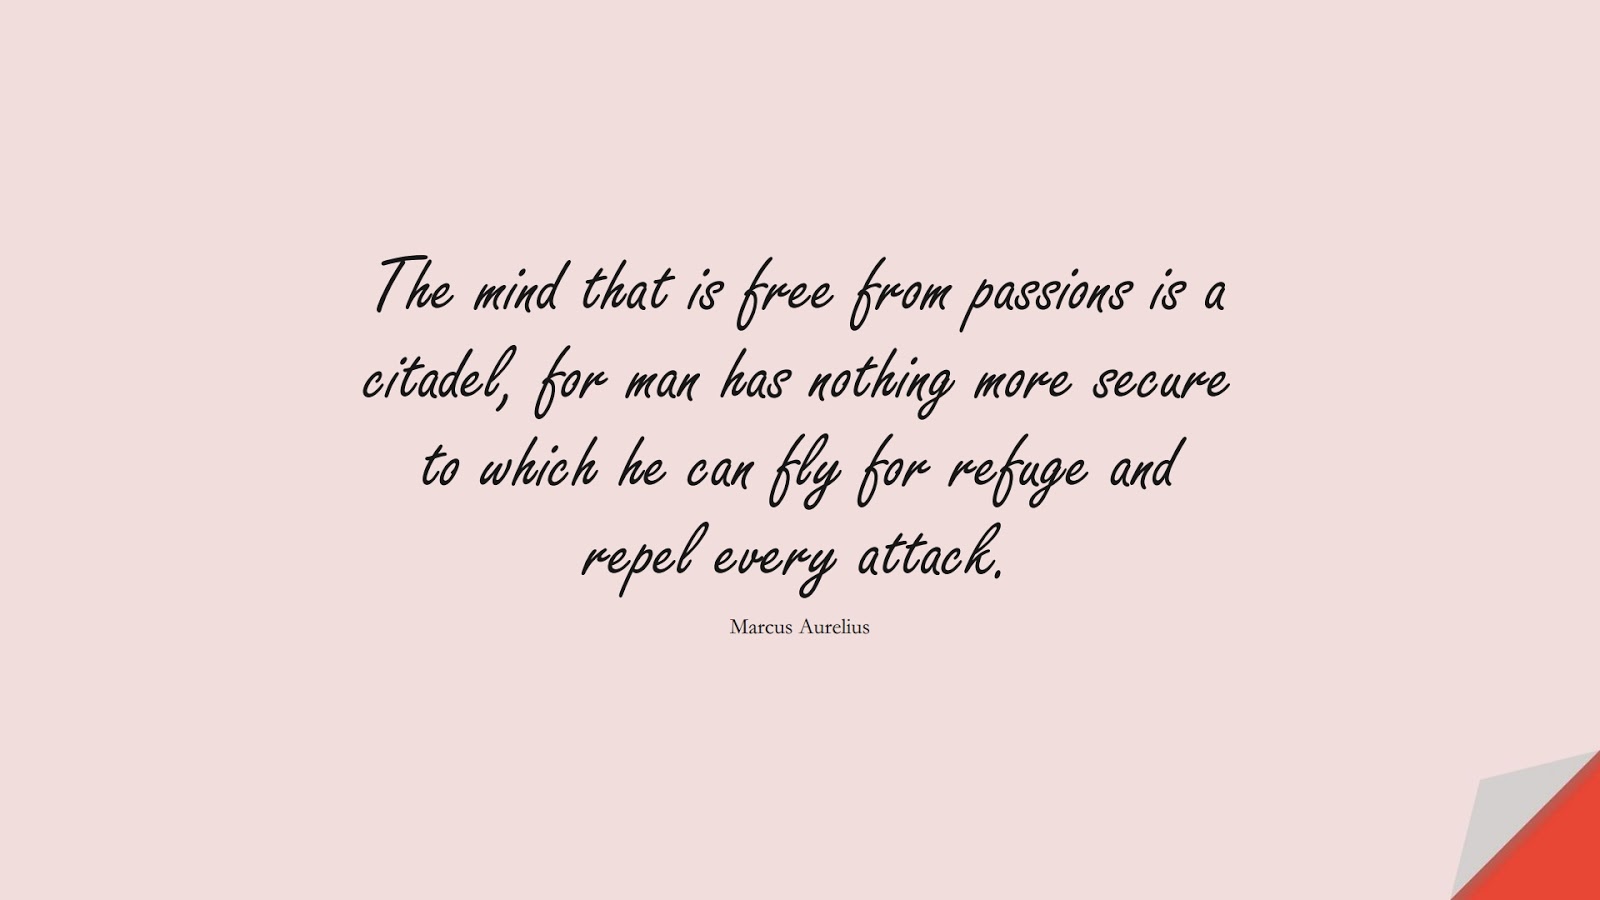 The mind that is free from passions is a citadel, for man has nothing more secure to which he can fly for refuge and repel every attack. (Marcus Aurelius);  #MarcusAureliusQuotes